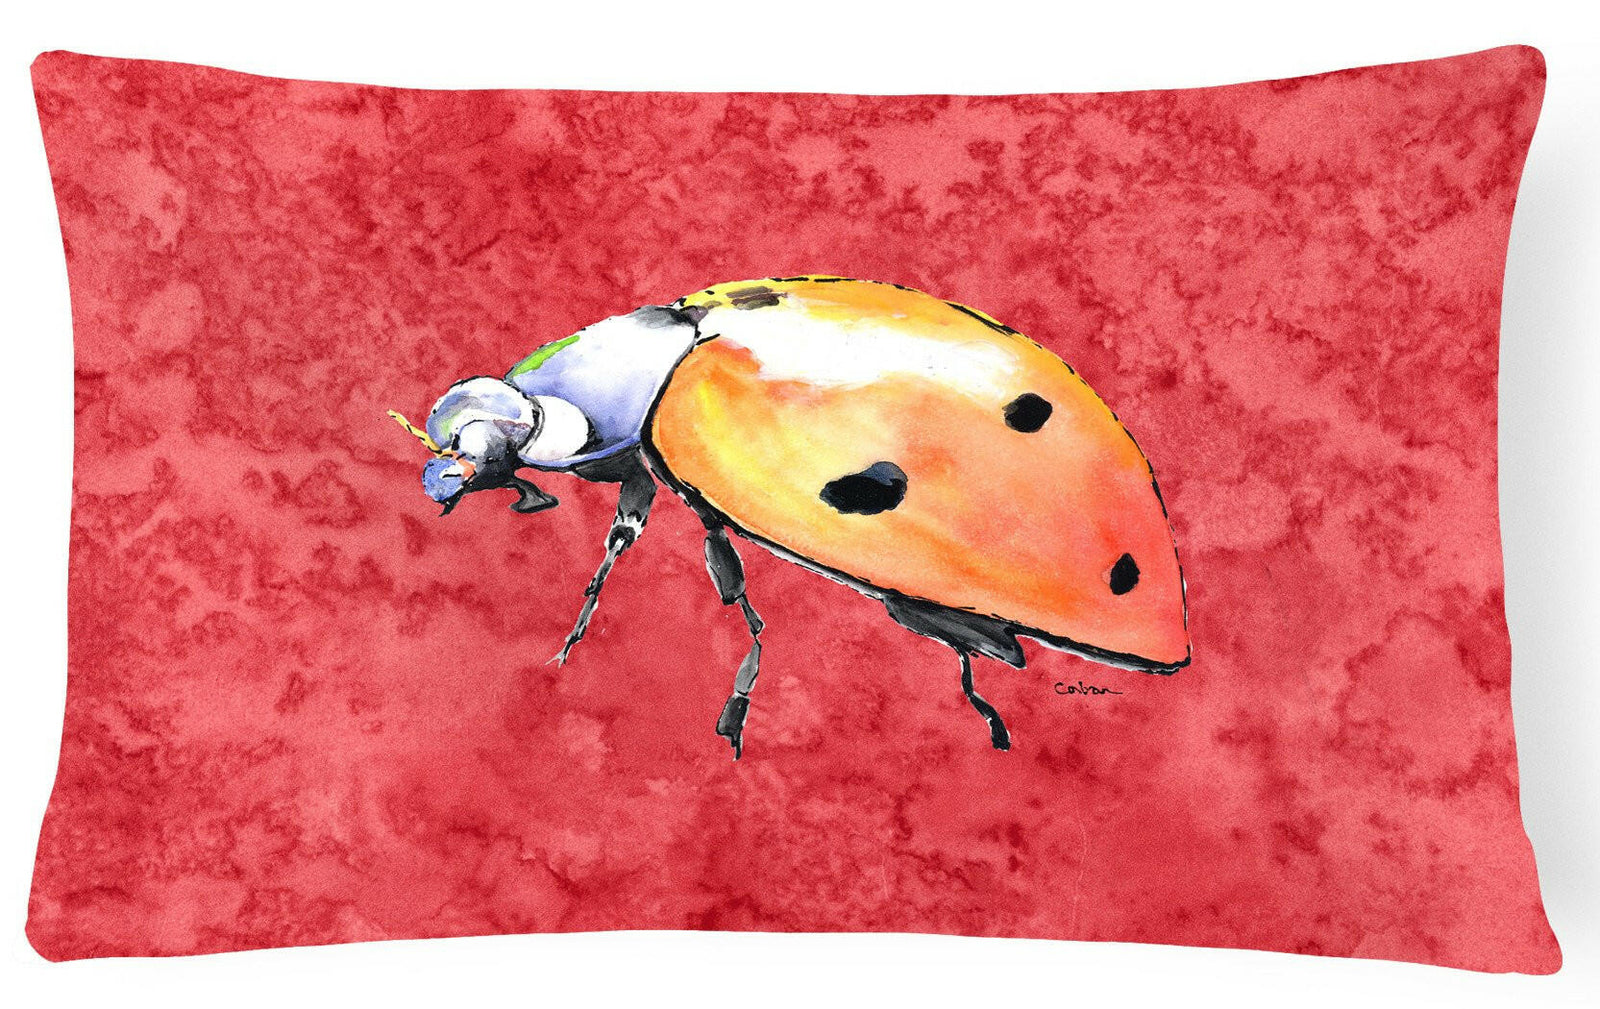 Lady Bug on Red   Canvas Fabric Decorative Pillow by Caroline's Treasures